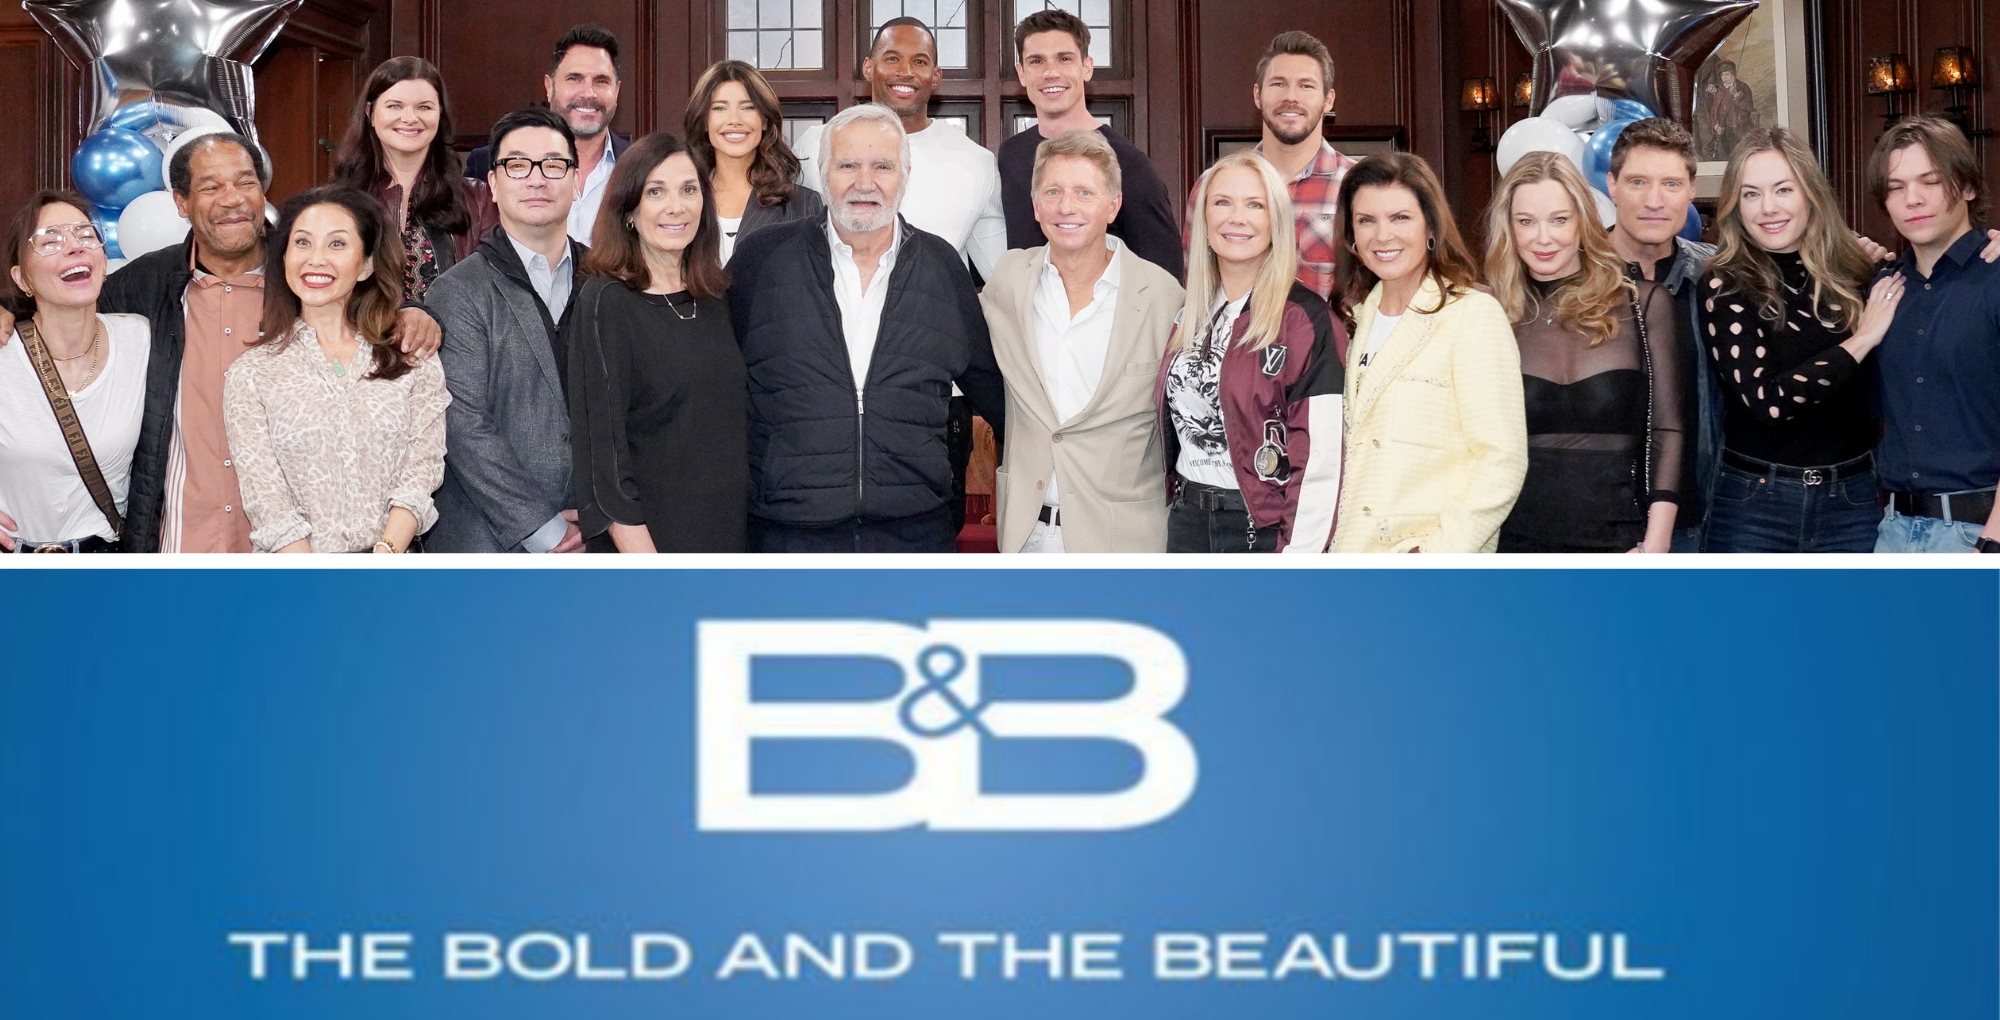 bold and the beautiful cast photo and logo.